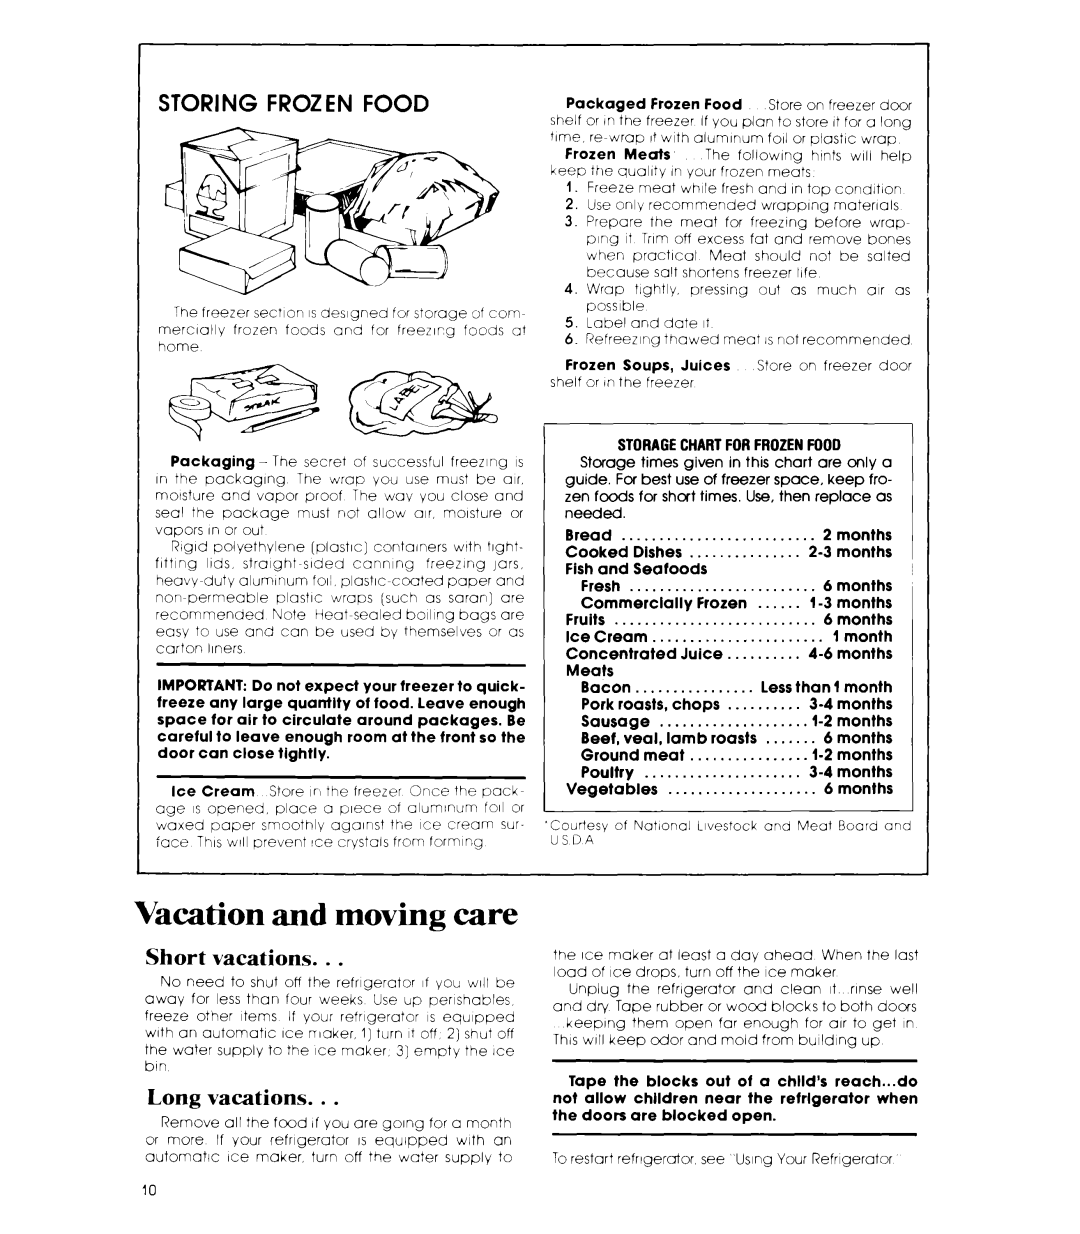 Whirlpool ETl8TK manual Vacation and moving care, Storing Frozen Food, Short vacations, Long vacations 